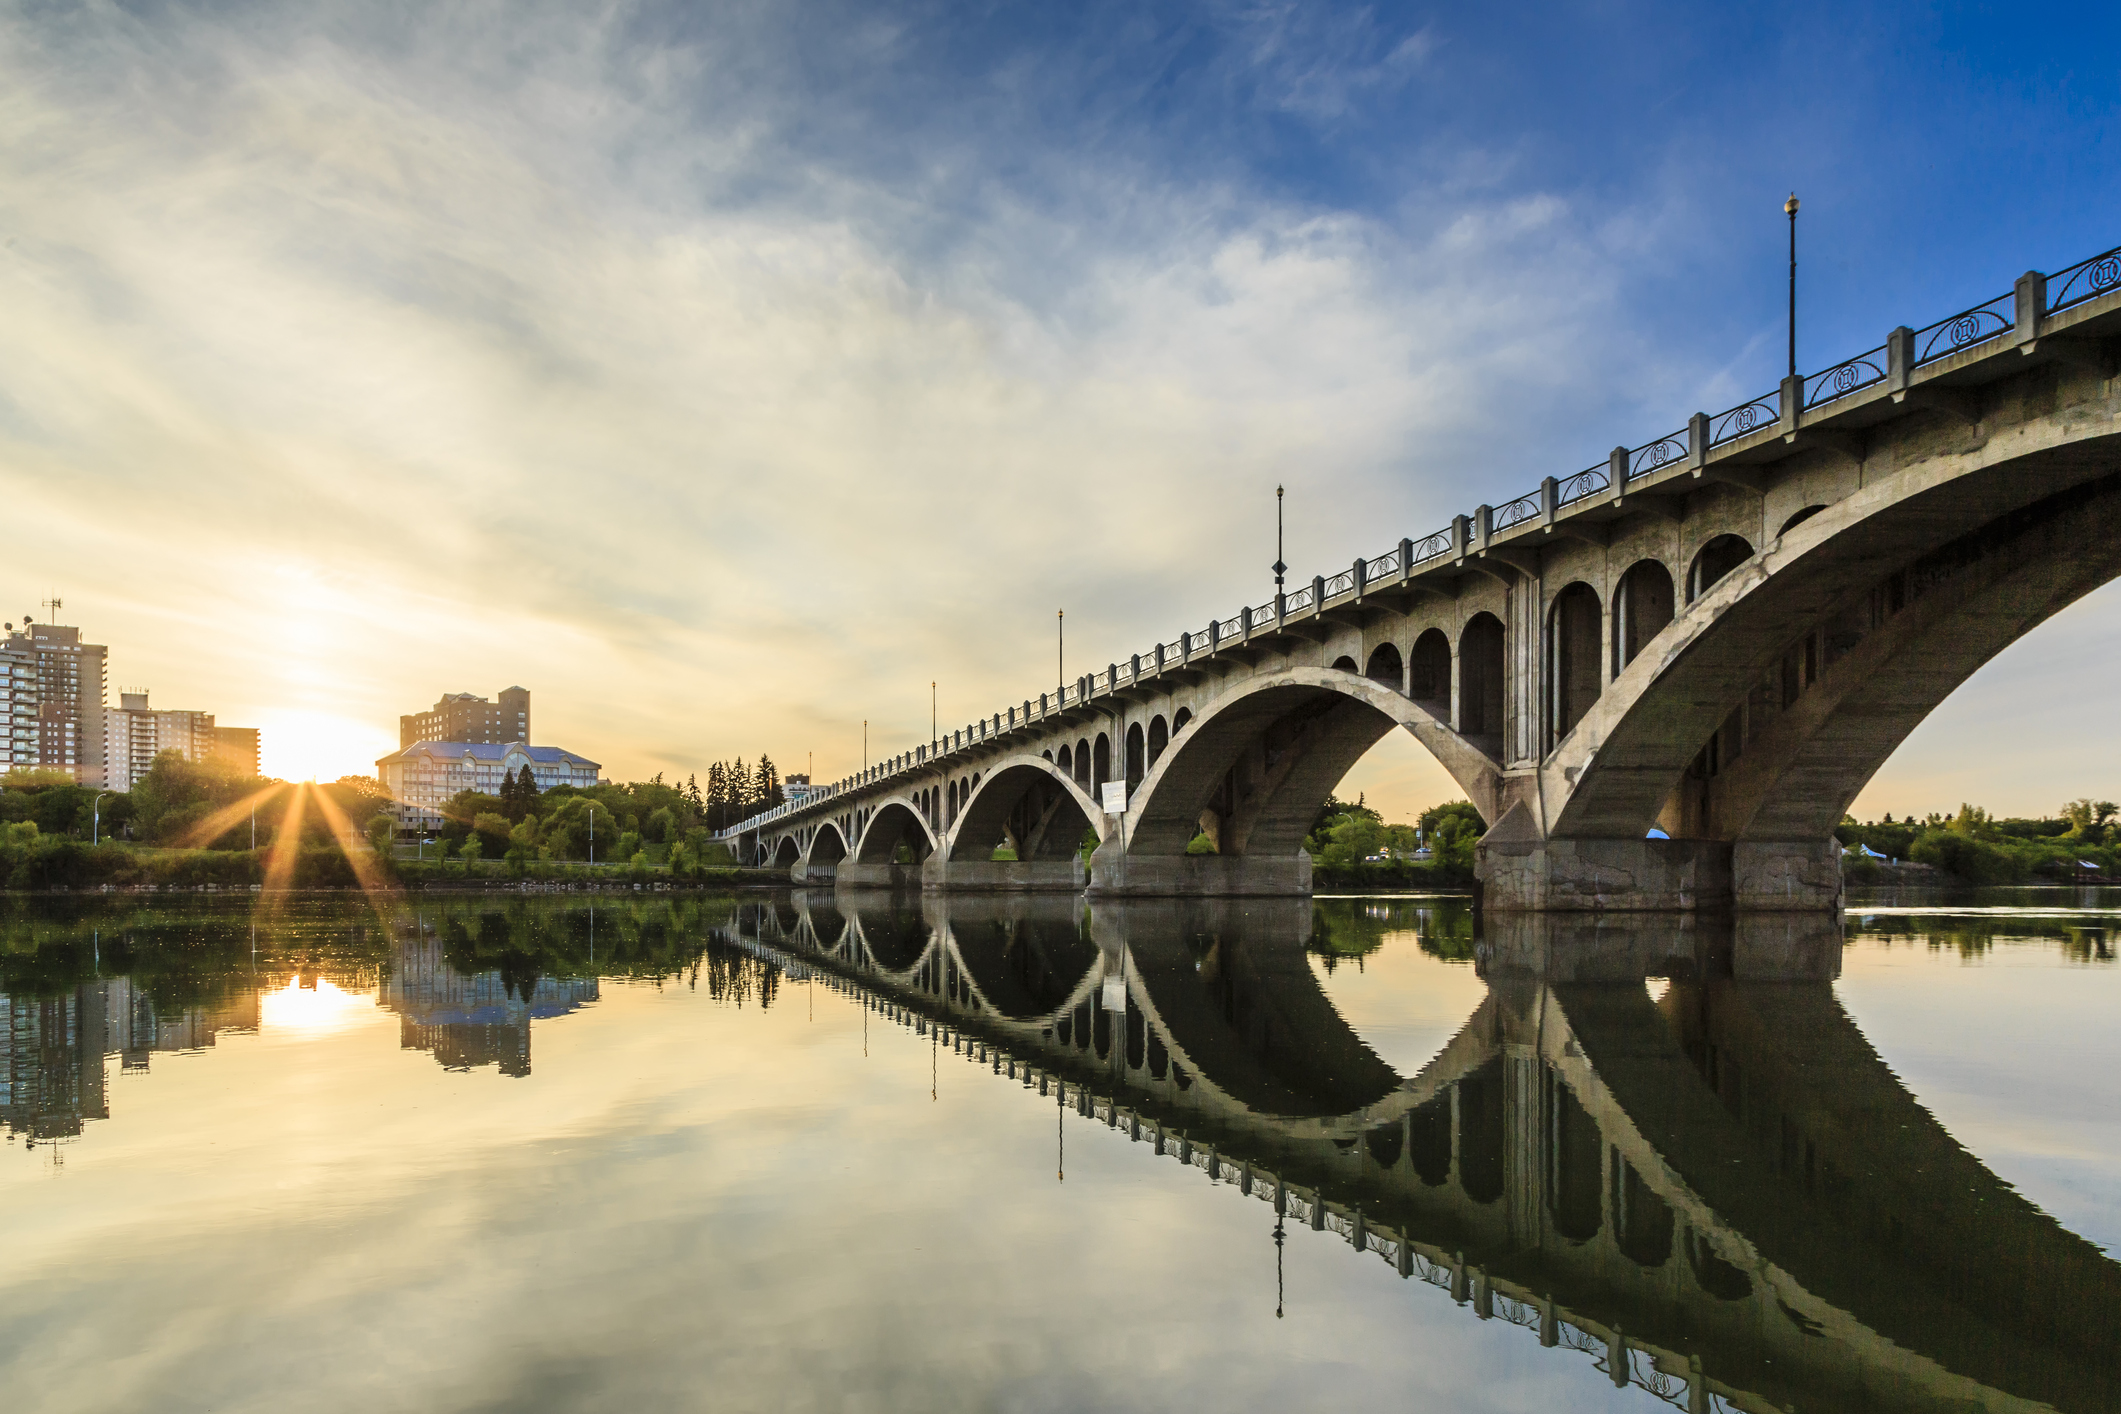 A warm summer sunset over the city of Saskatoon located in Central Canada where the calm waters of the South Saskatchewan River flows under the University Bridge.